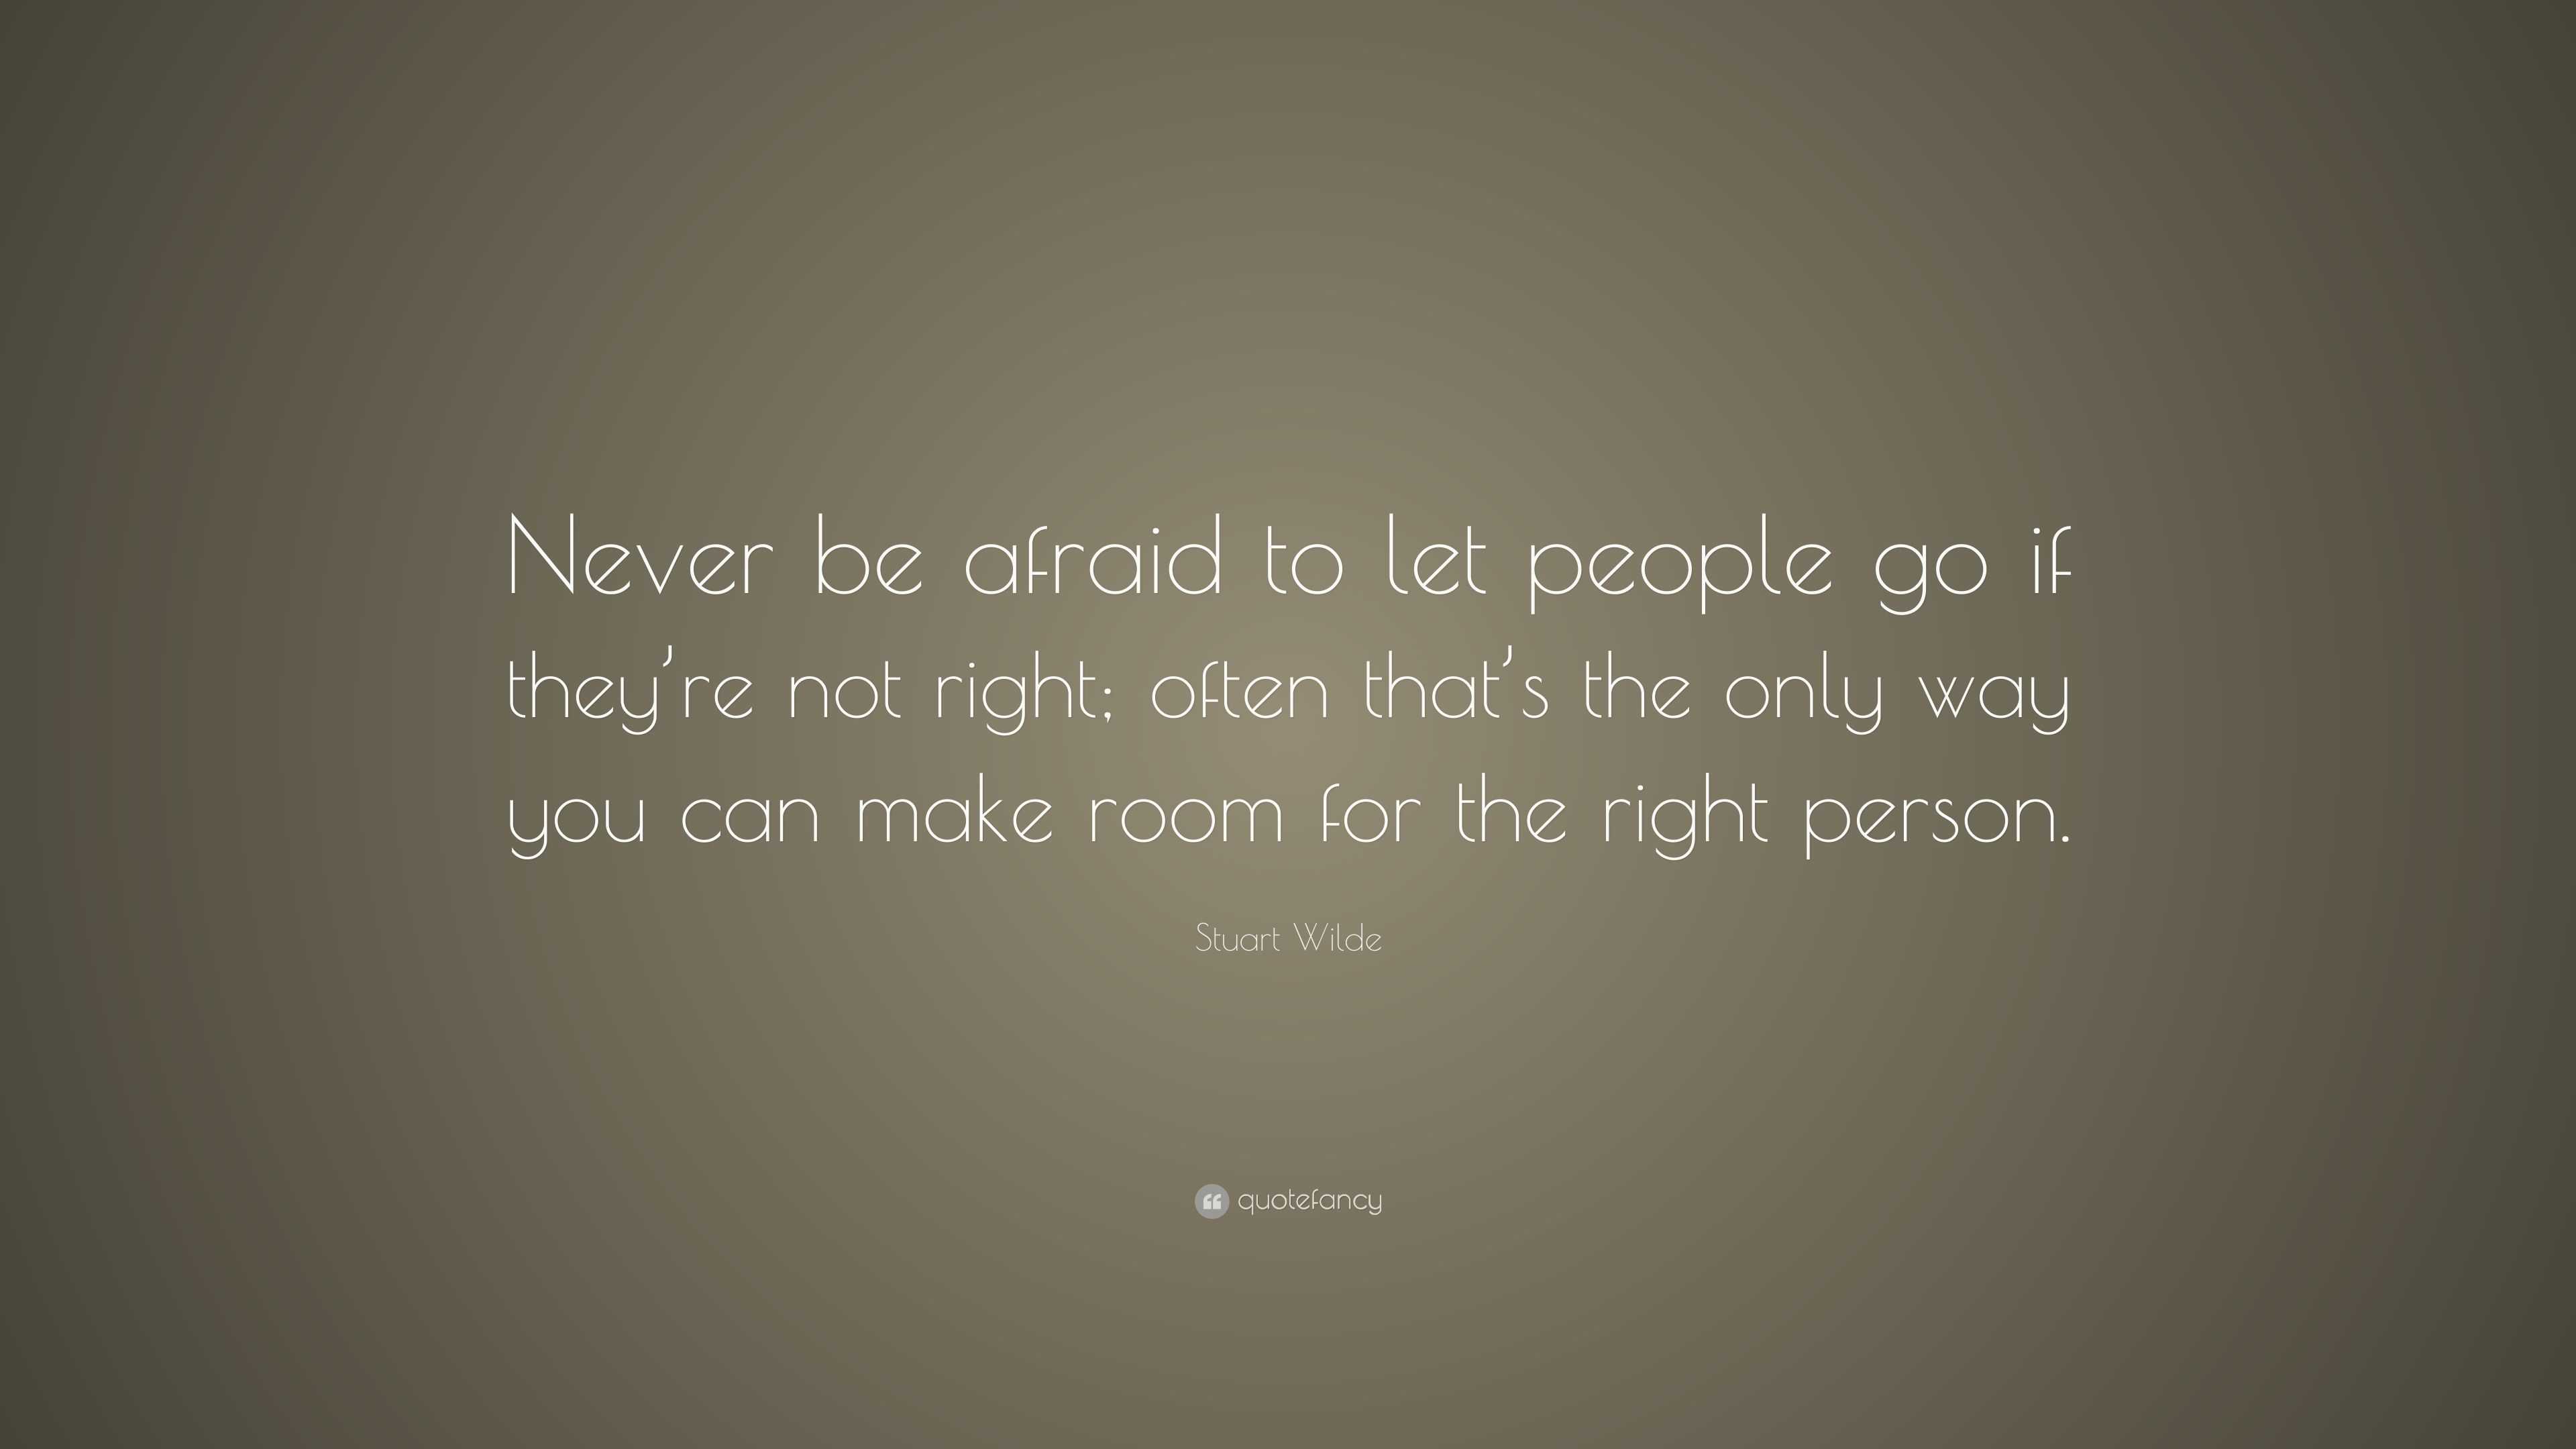 Stuart Wilde Quote: “Never be afraid to let people go if they’re not ...